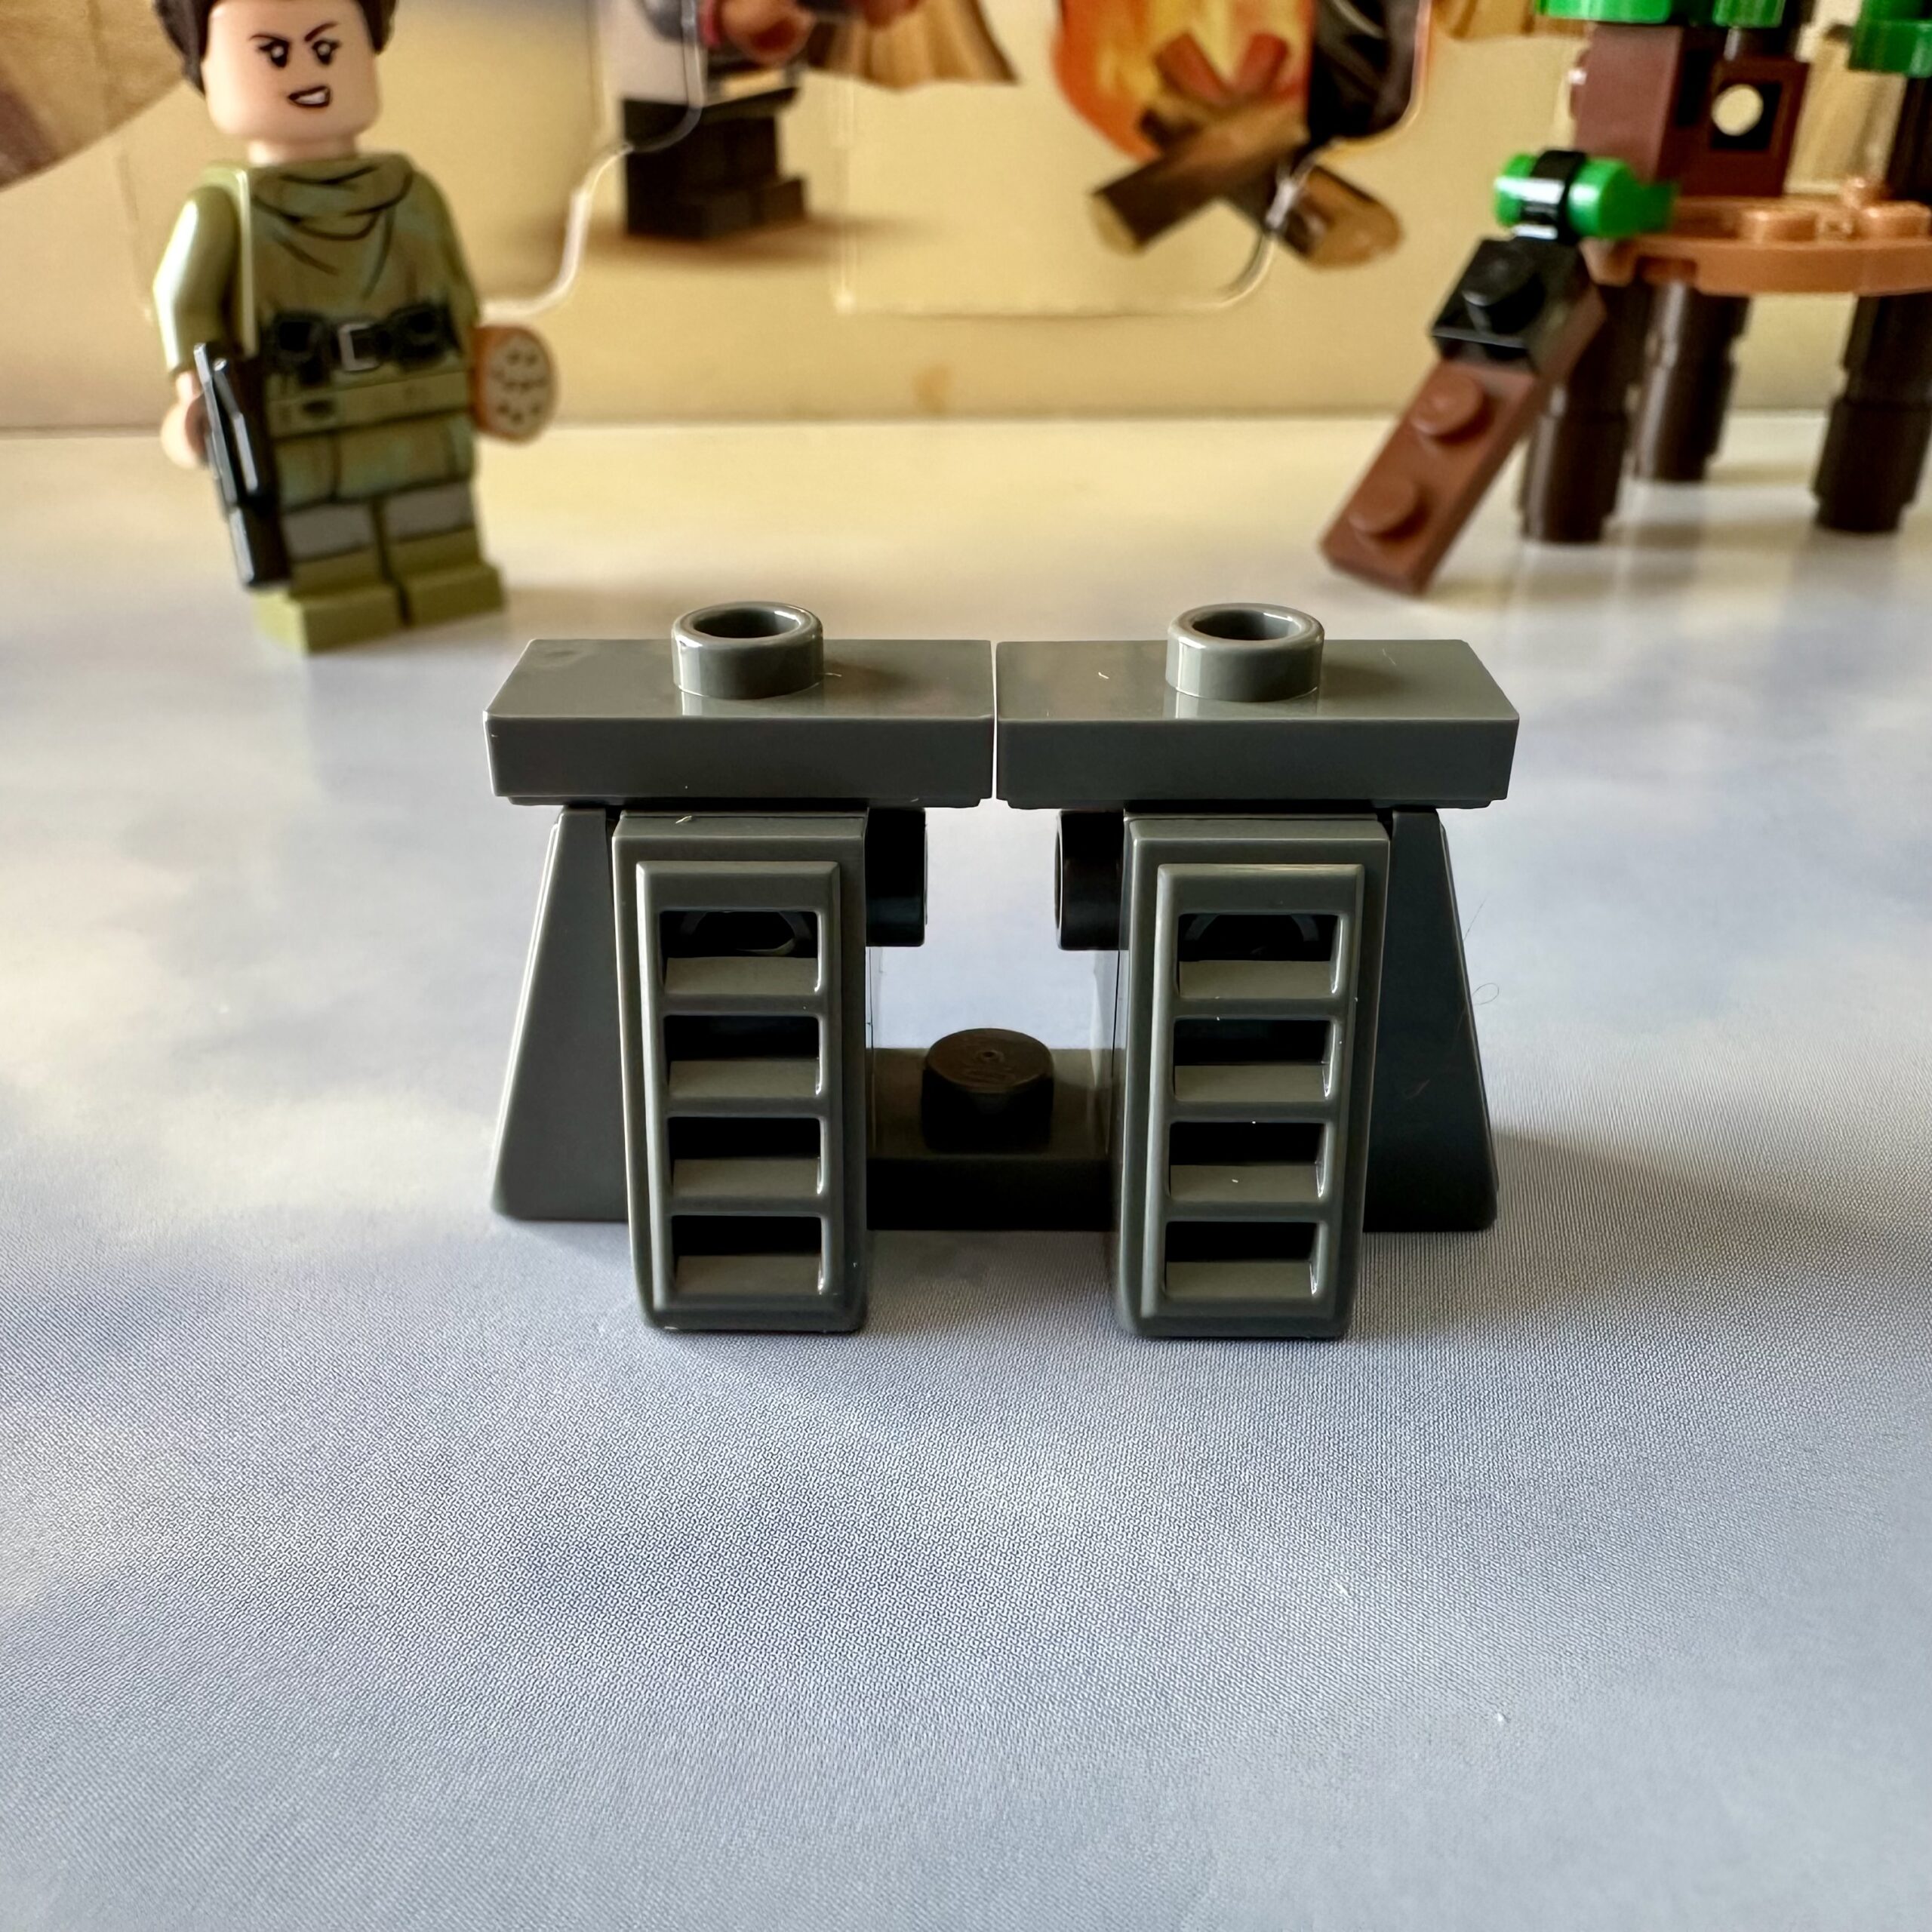 LEGO microbuild of the bunker on Endor that the rebels took over and blew up. It's just a collection of gray plates and slopes.